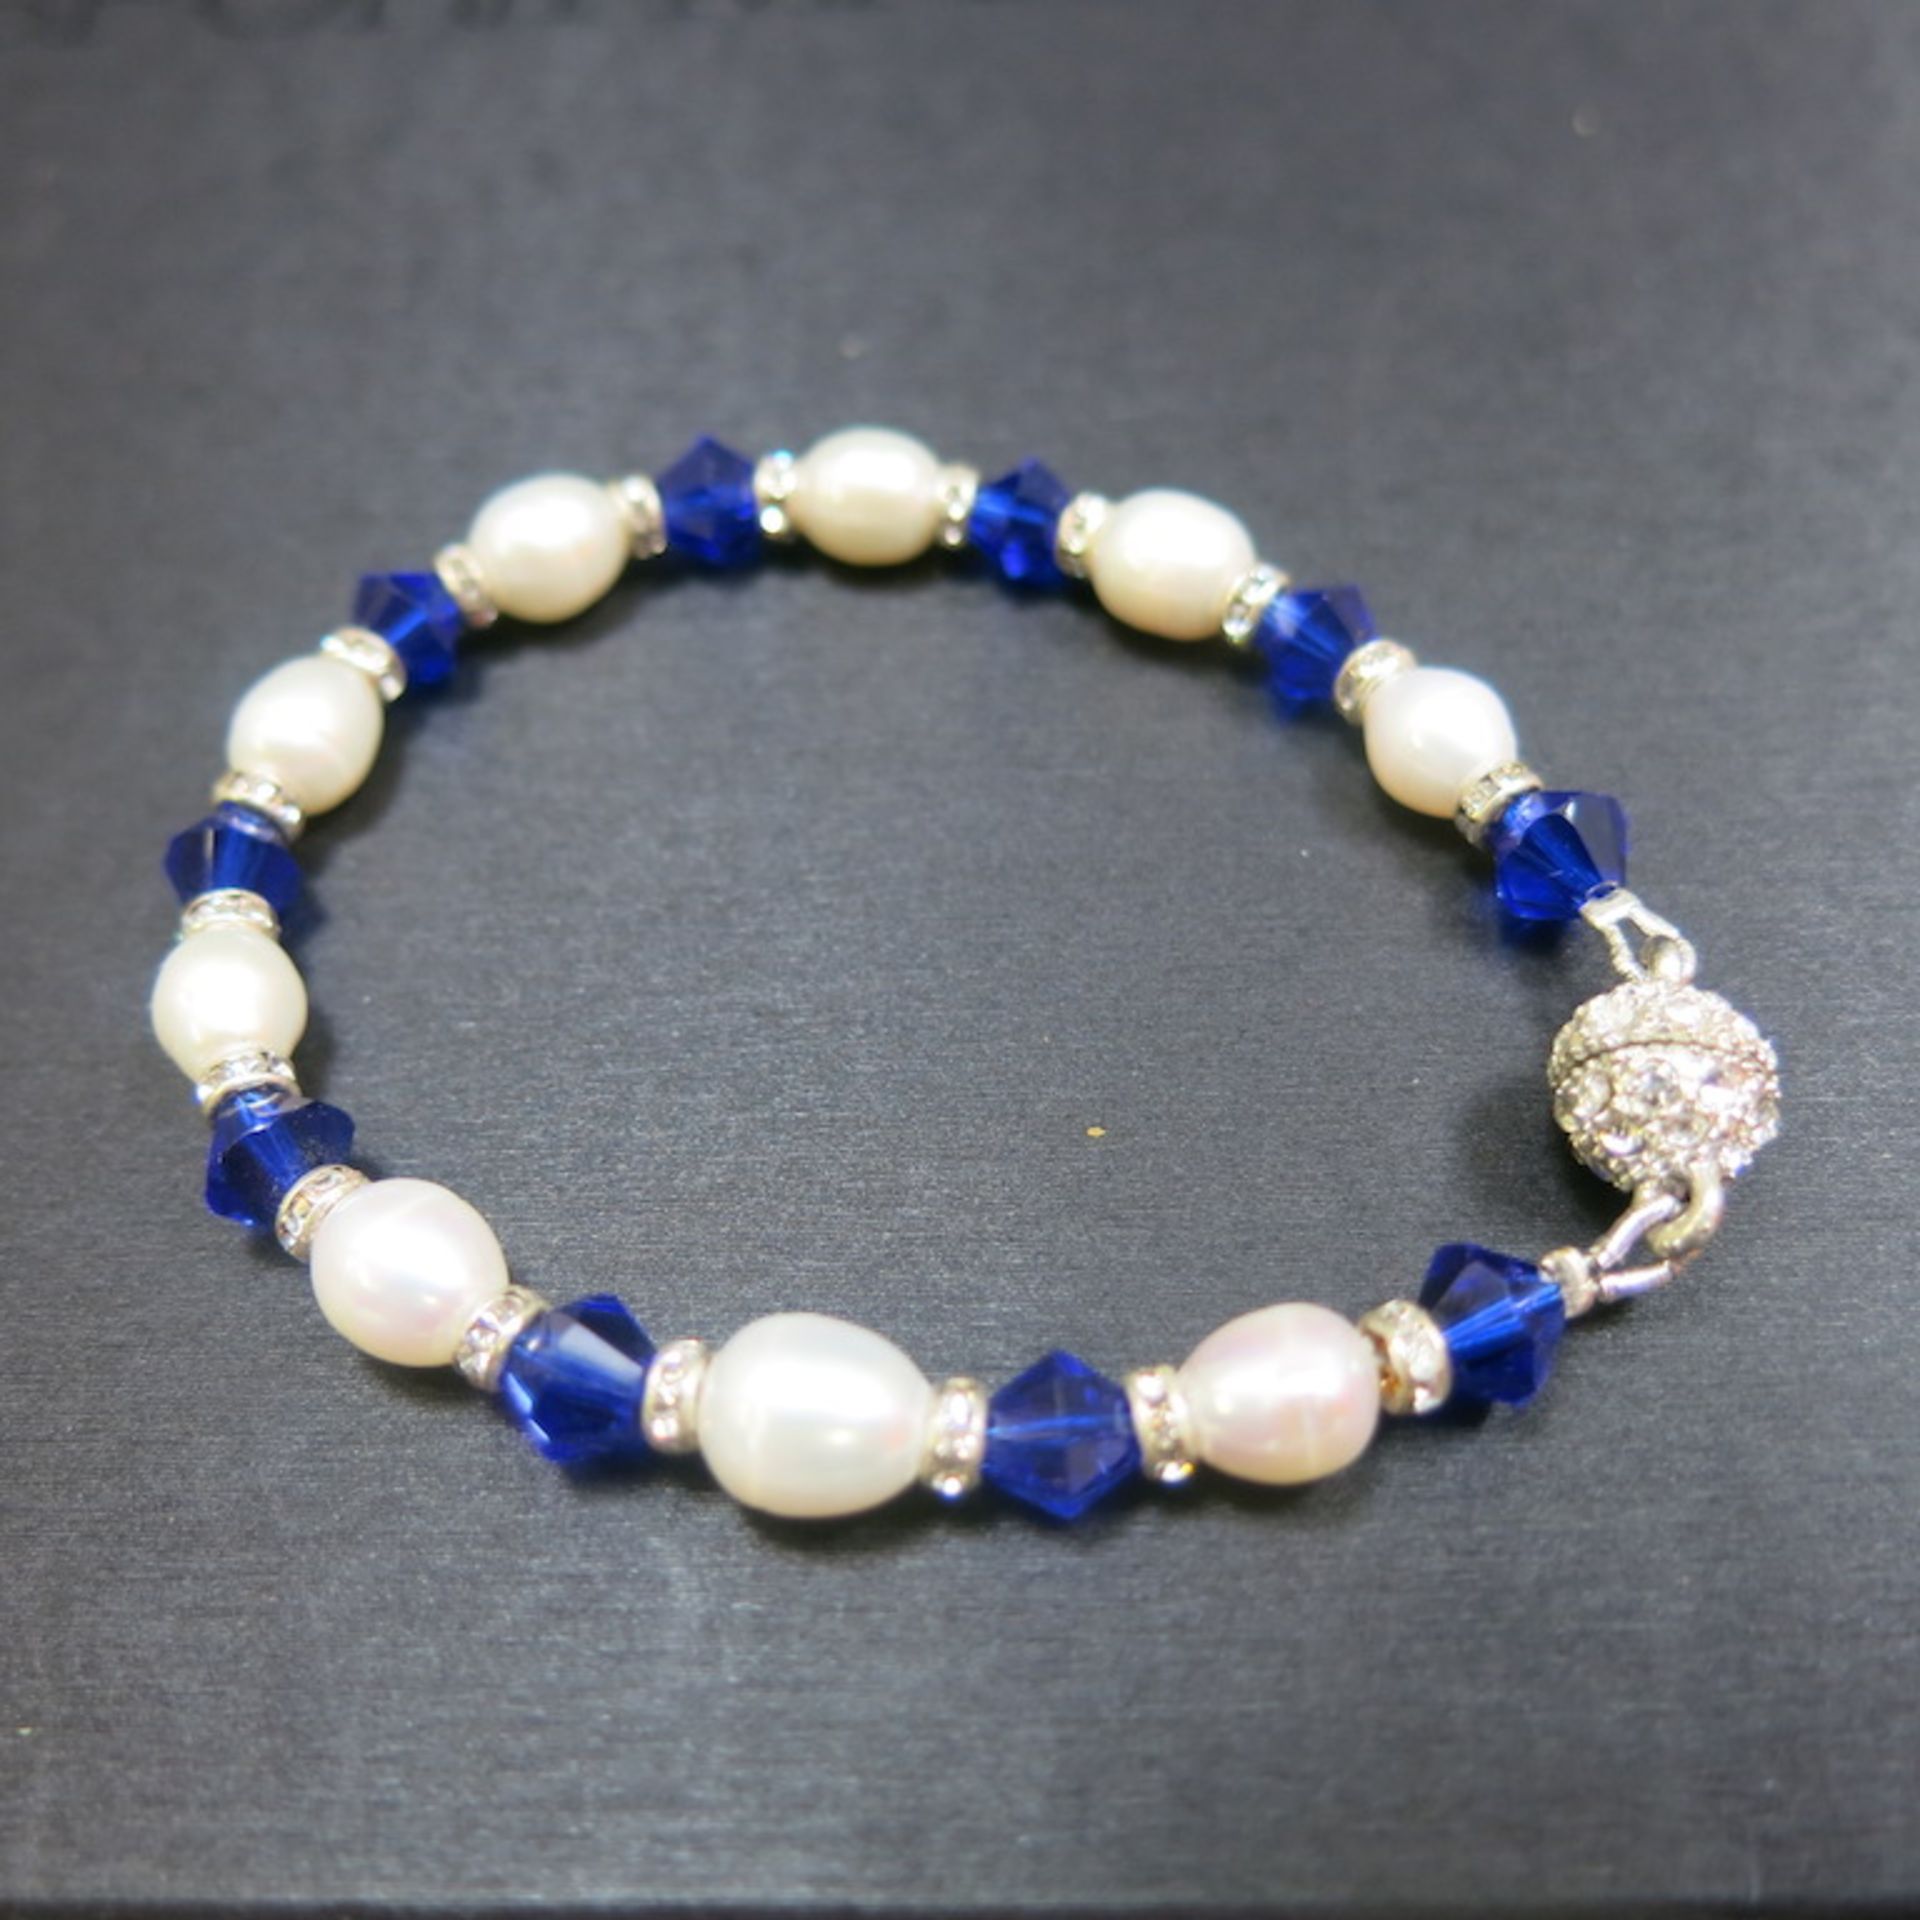 Pearl Bracelet (6.5mm) with Blue & Clear Stone Detail. Magnetic Clasp. RRP £58.00 - Image 3 of 3